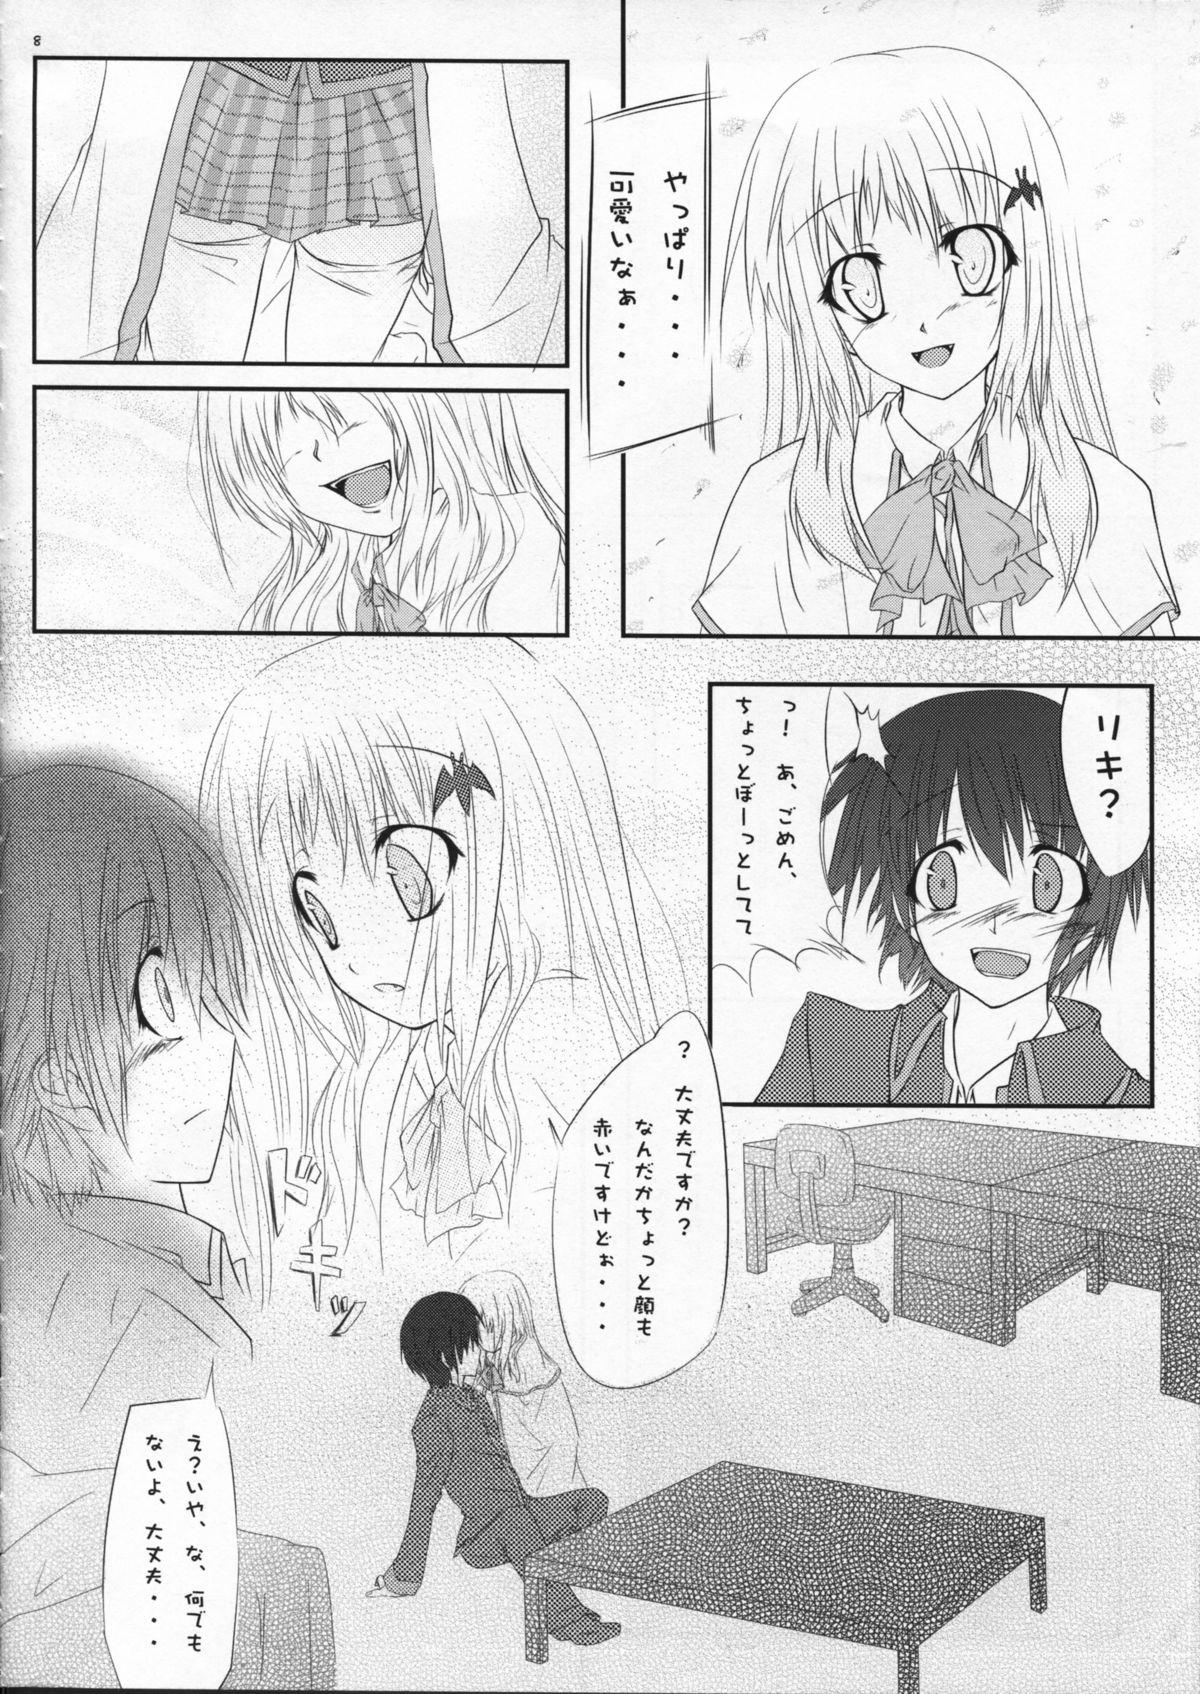 Fishnets Wanko no Jikan - Little busters Gay Dudes - Page 8